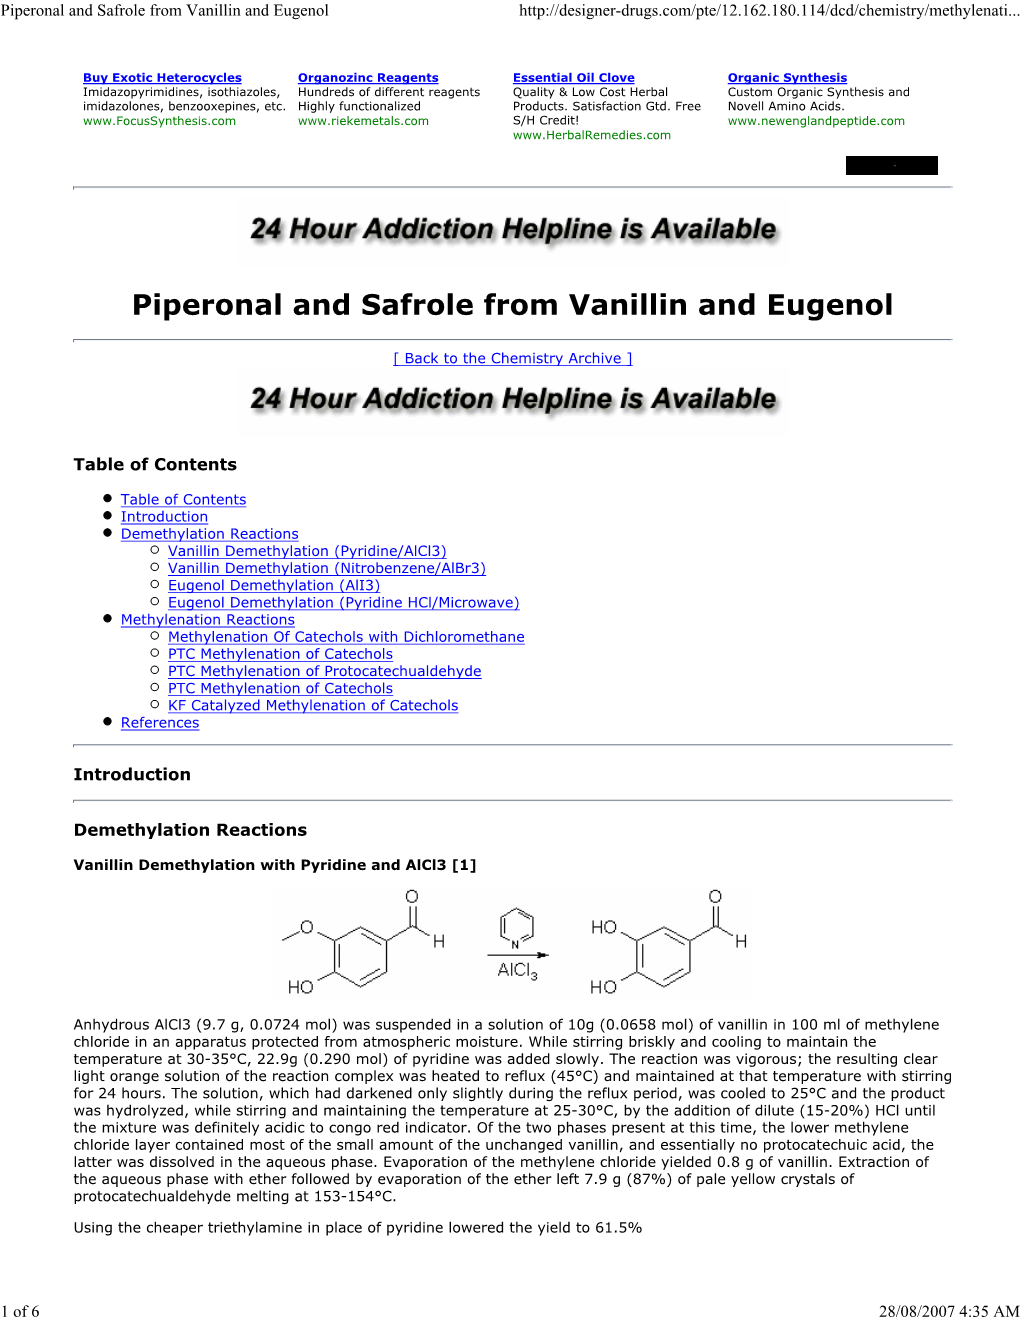 Piperonal and Safrole from Vanillin and Eugenol